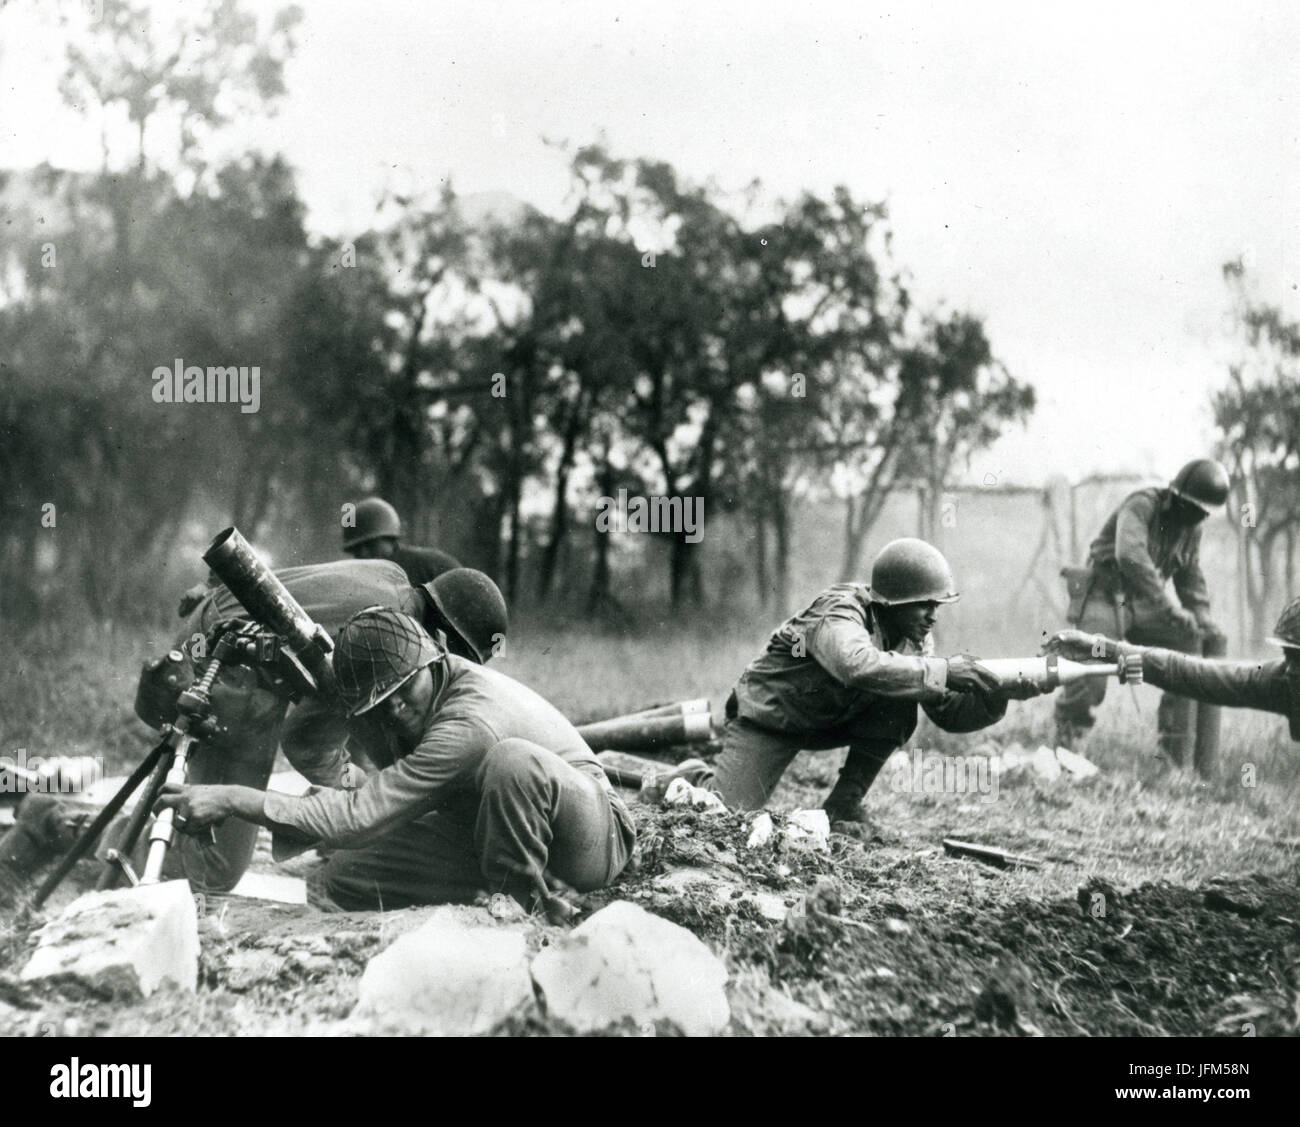 November 1944 - Members of a Negro mortar company of the 92nd Division pass the ammunition and heave it over at the Germans in an almost endless stream near Massa, Italy. This company is credited with liquidating several machine gun nests. Stock Photo